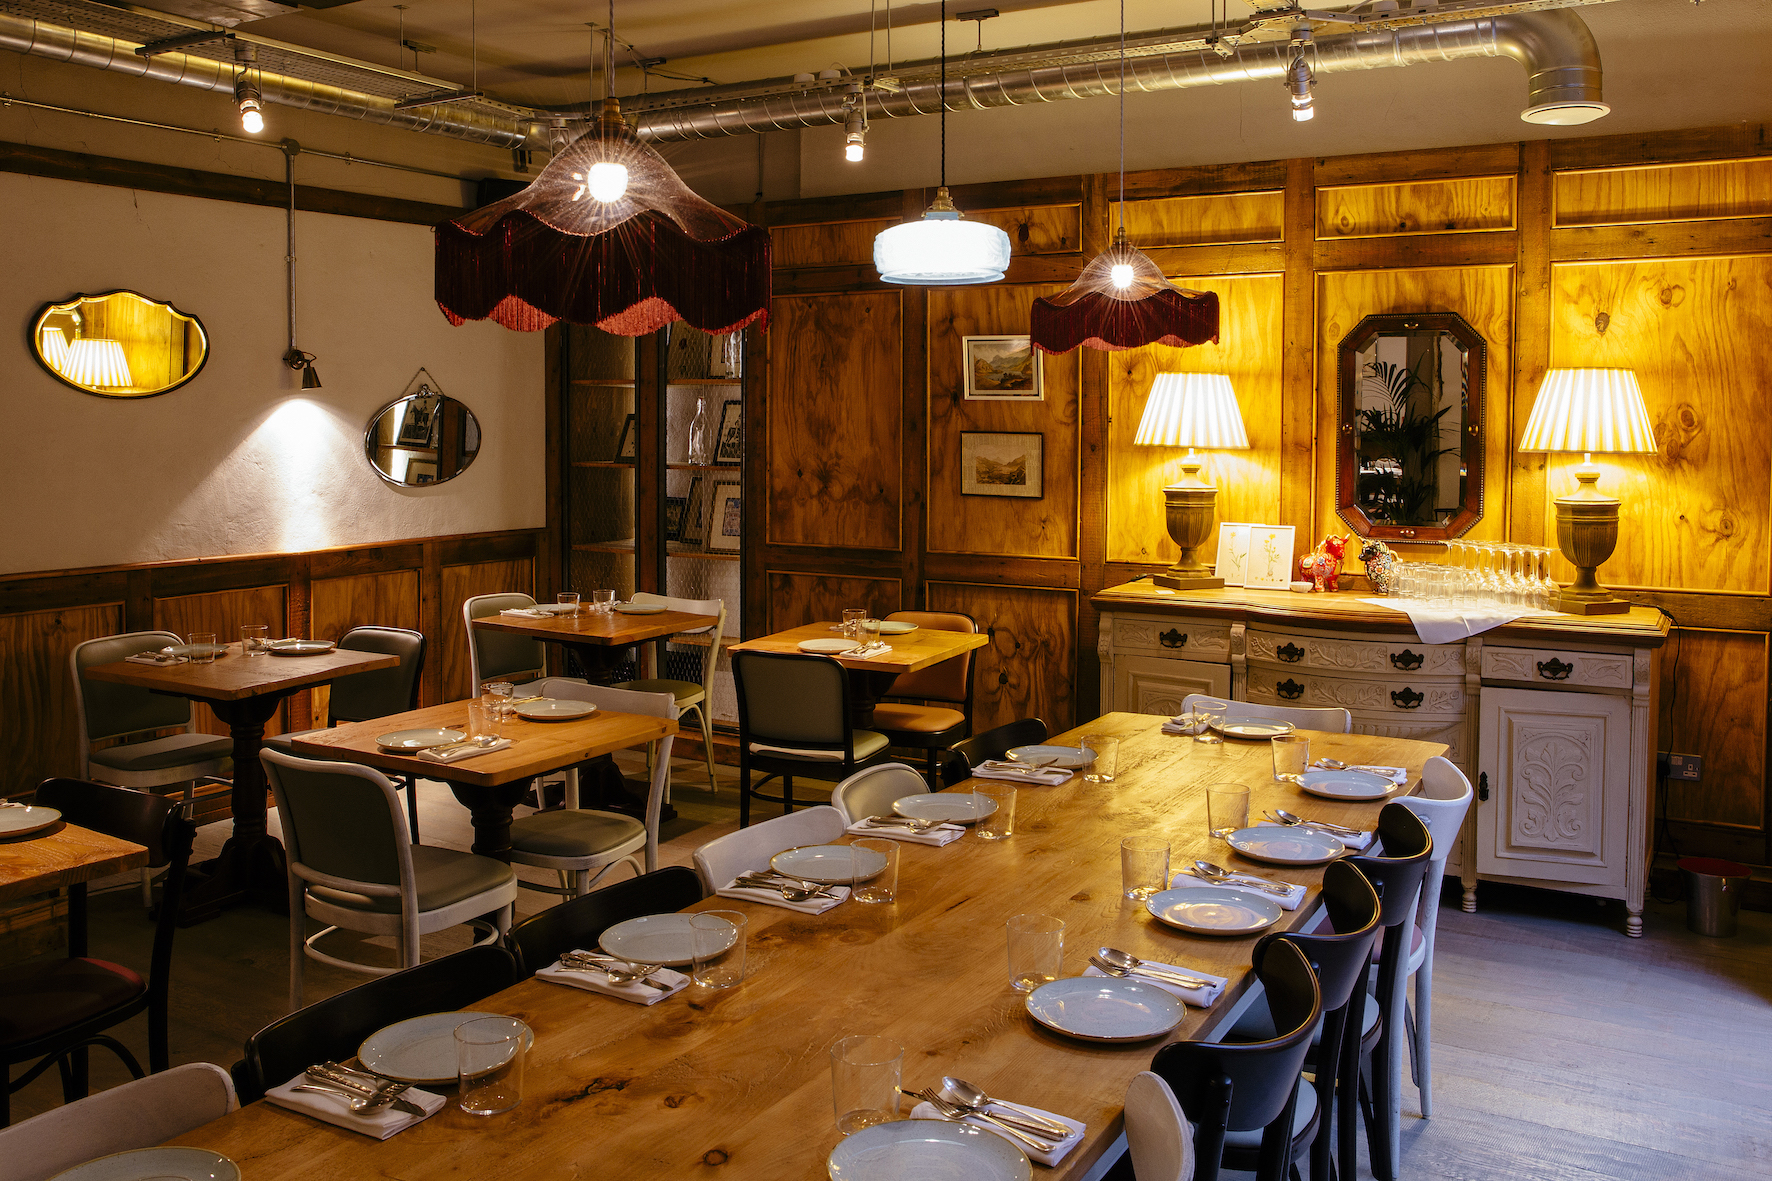 Pachamama London reviewed by Anthea Gerrie | TripReporter